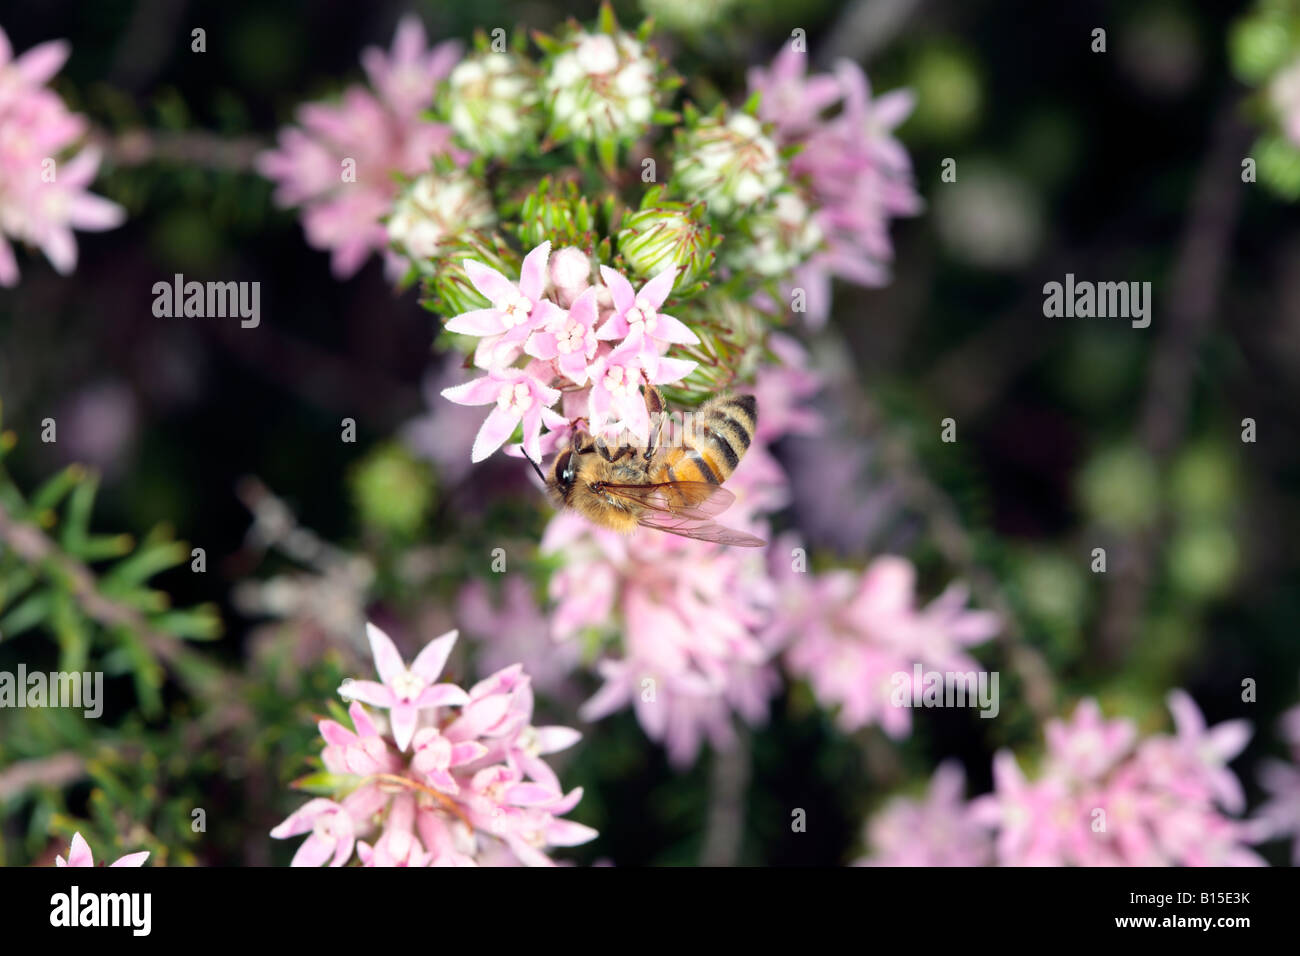 Honey Bee-Apis mellifera- collecting pollen from Phylica lachnaeoides flowers-Family Rhamnaceae Stock Photo